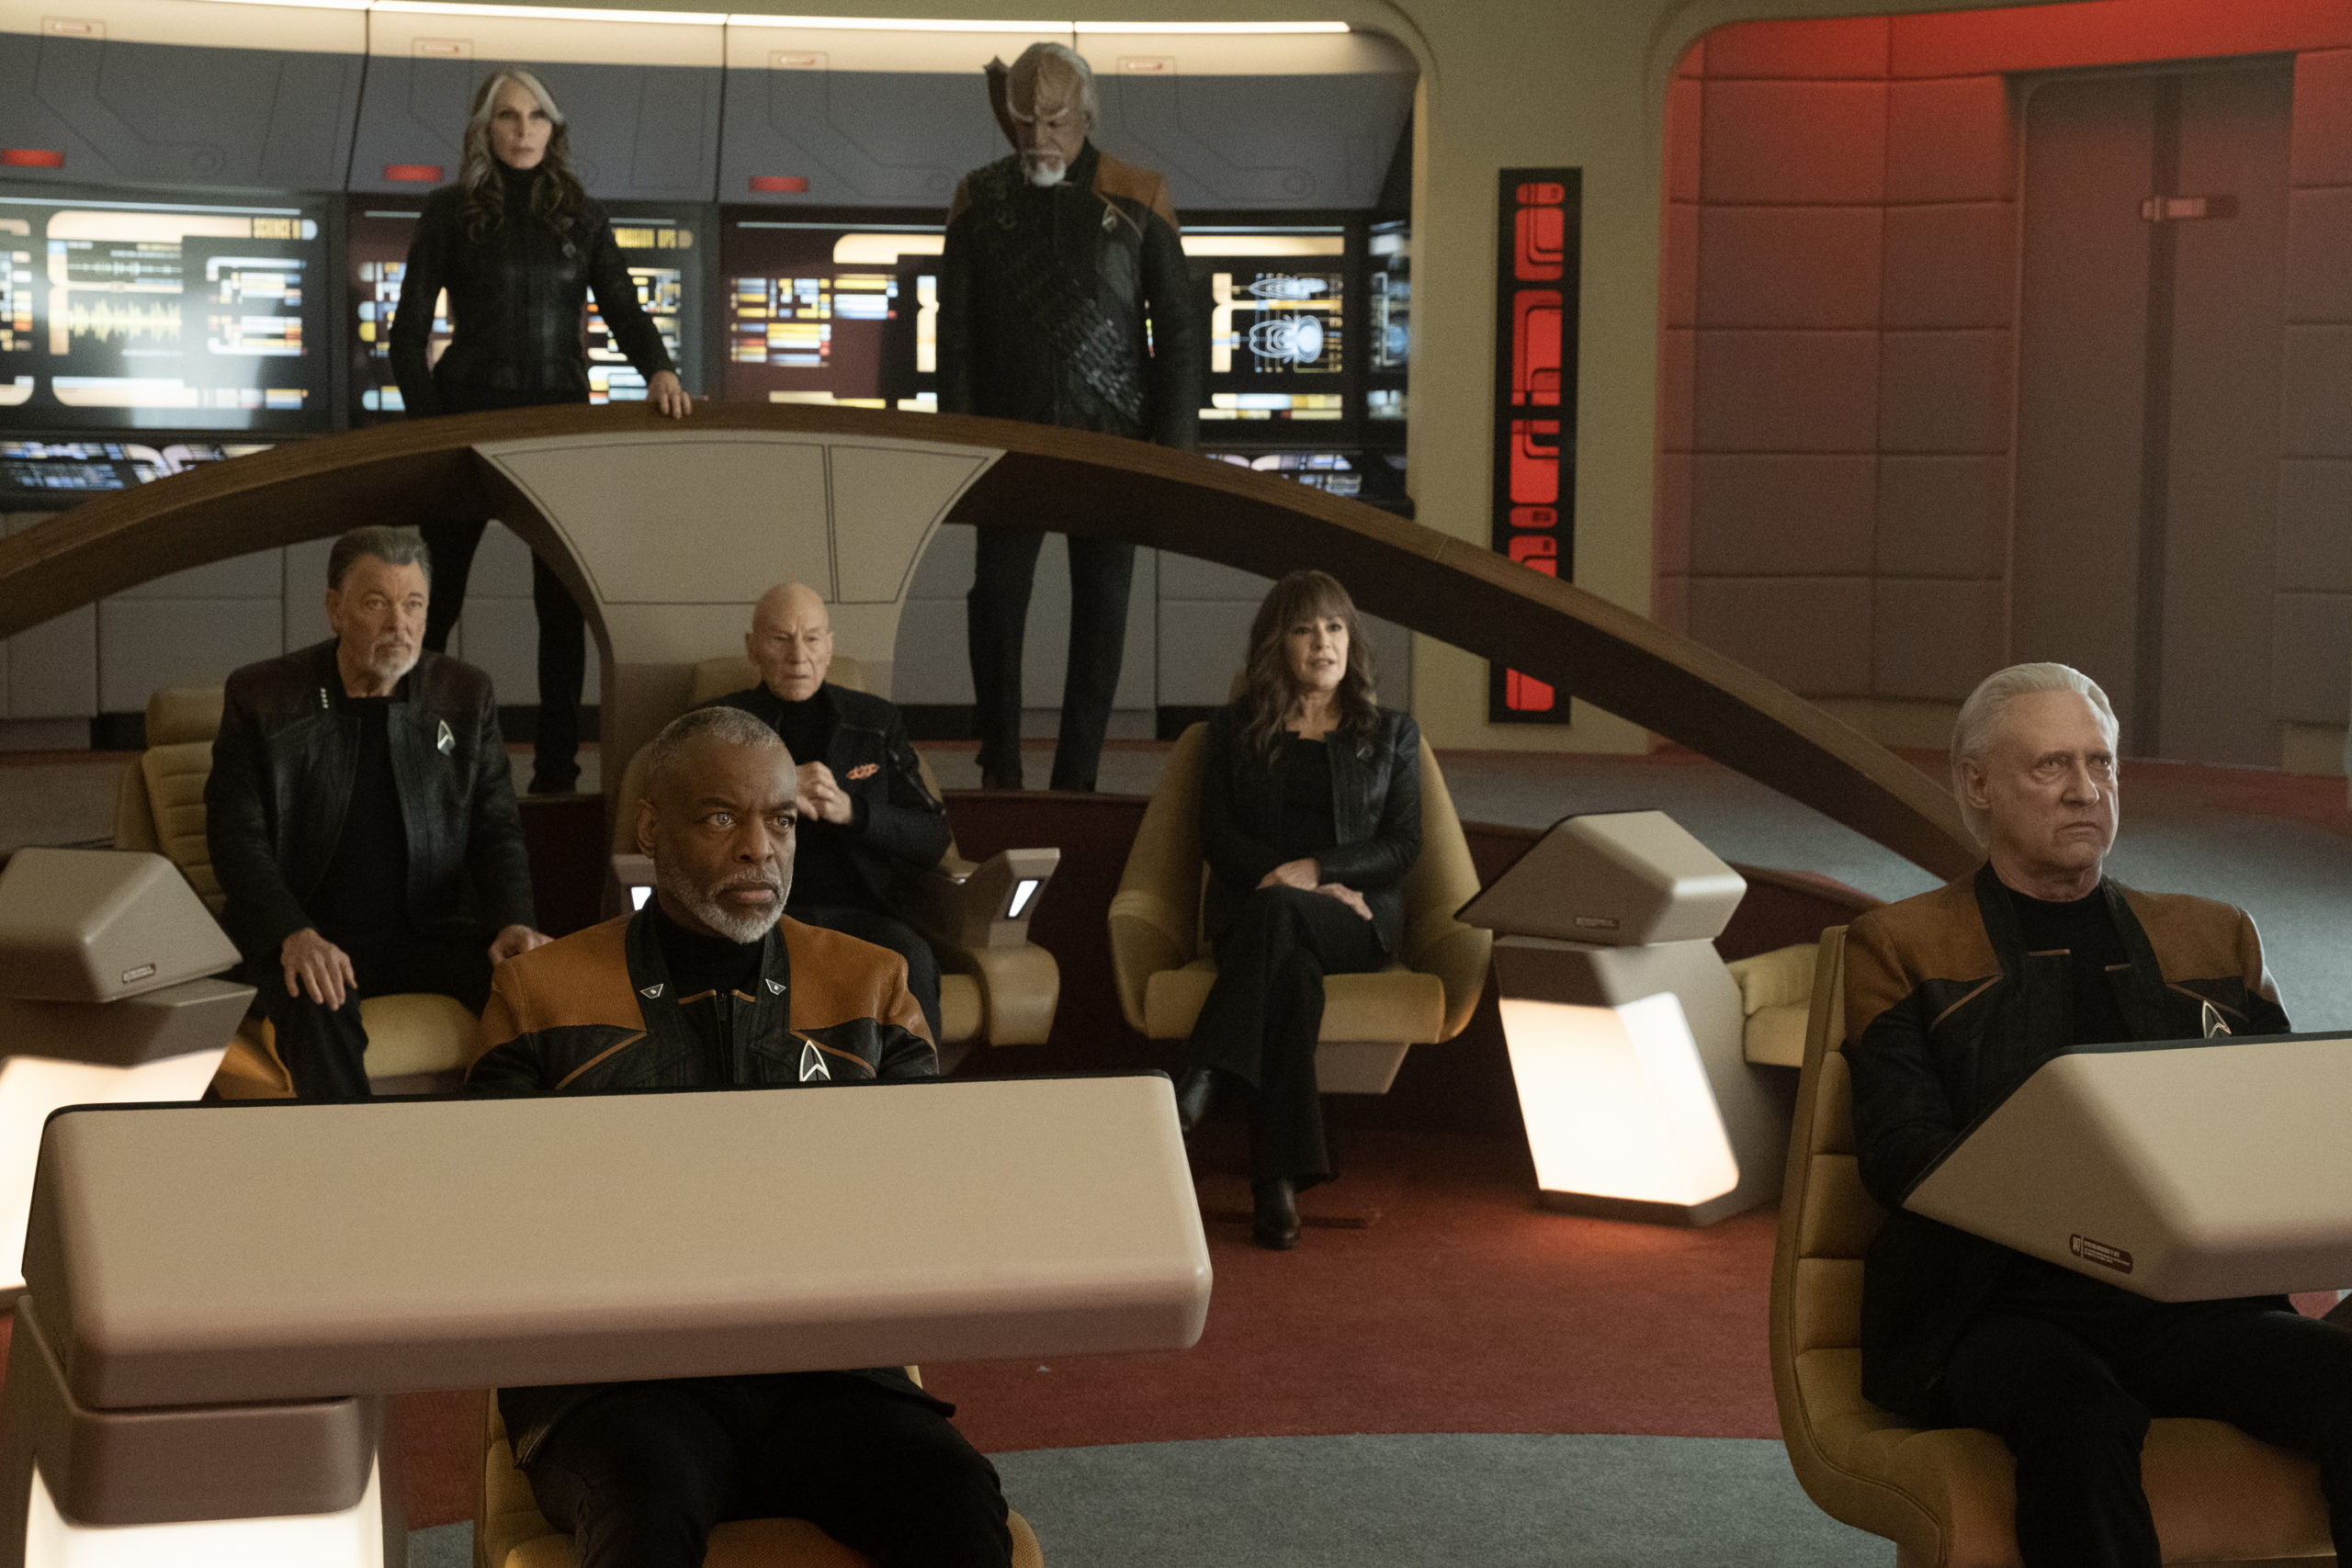 LeVar Burton as Geordi La Forge, Brent Spiner as Data, Gates McFadden as Dr. Beverly Crusher, Michael Dorn as Worf, Marina Sirtis as Deanna Troi, Jonathan Frakes as Will Riker and Patrick Stewart as Picard in "The Last Generation" Episode 310, Star Trek: Picard on Paramount+. Photo Credit: Trae Patton/Paramount+. ©2021 Viacom, International Inc. All Rights Reserved.